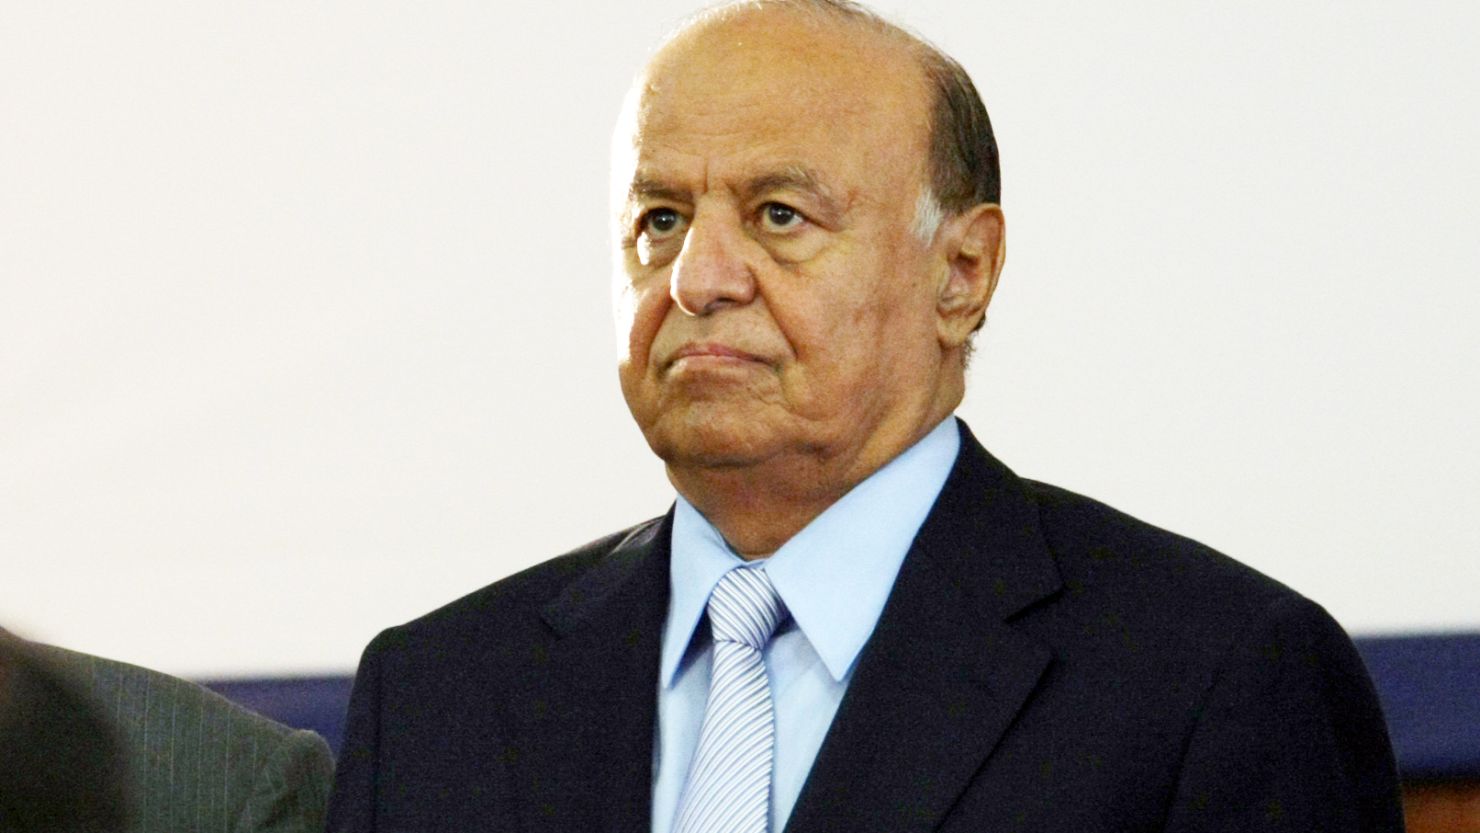 Yemeni President Abdu Rabu Mansour Hadi has agreed to reforms, but Houthi loyalists have rejected his offer.
